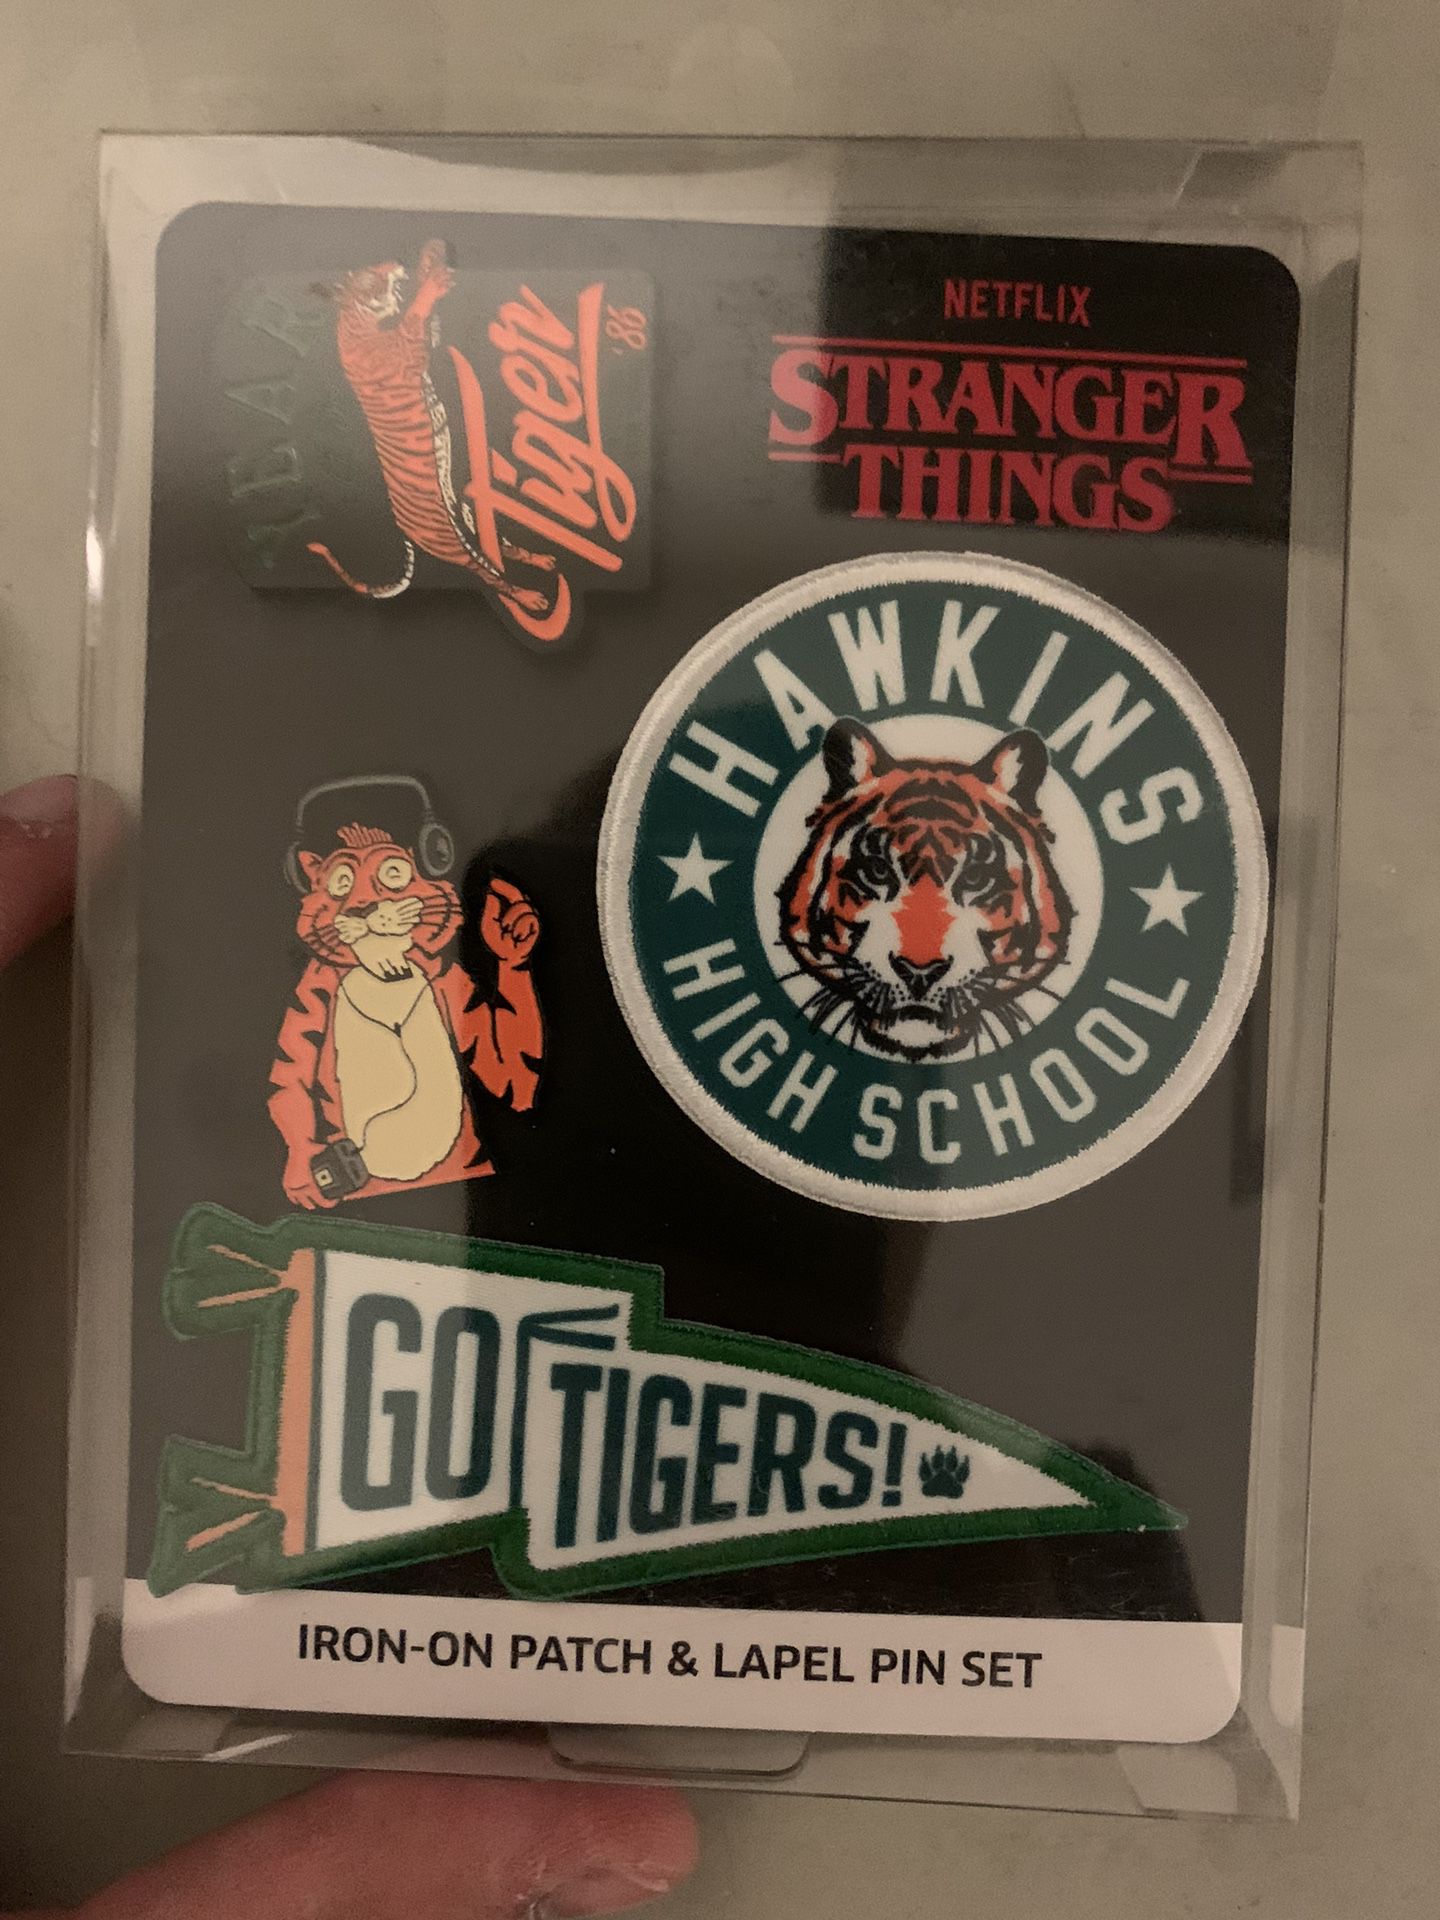 Stranger Things patches